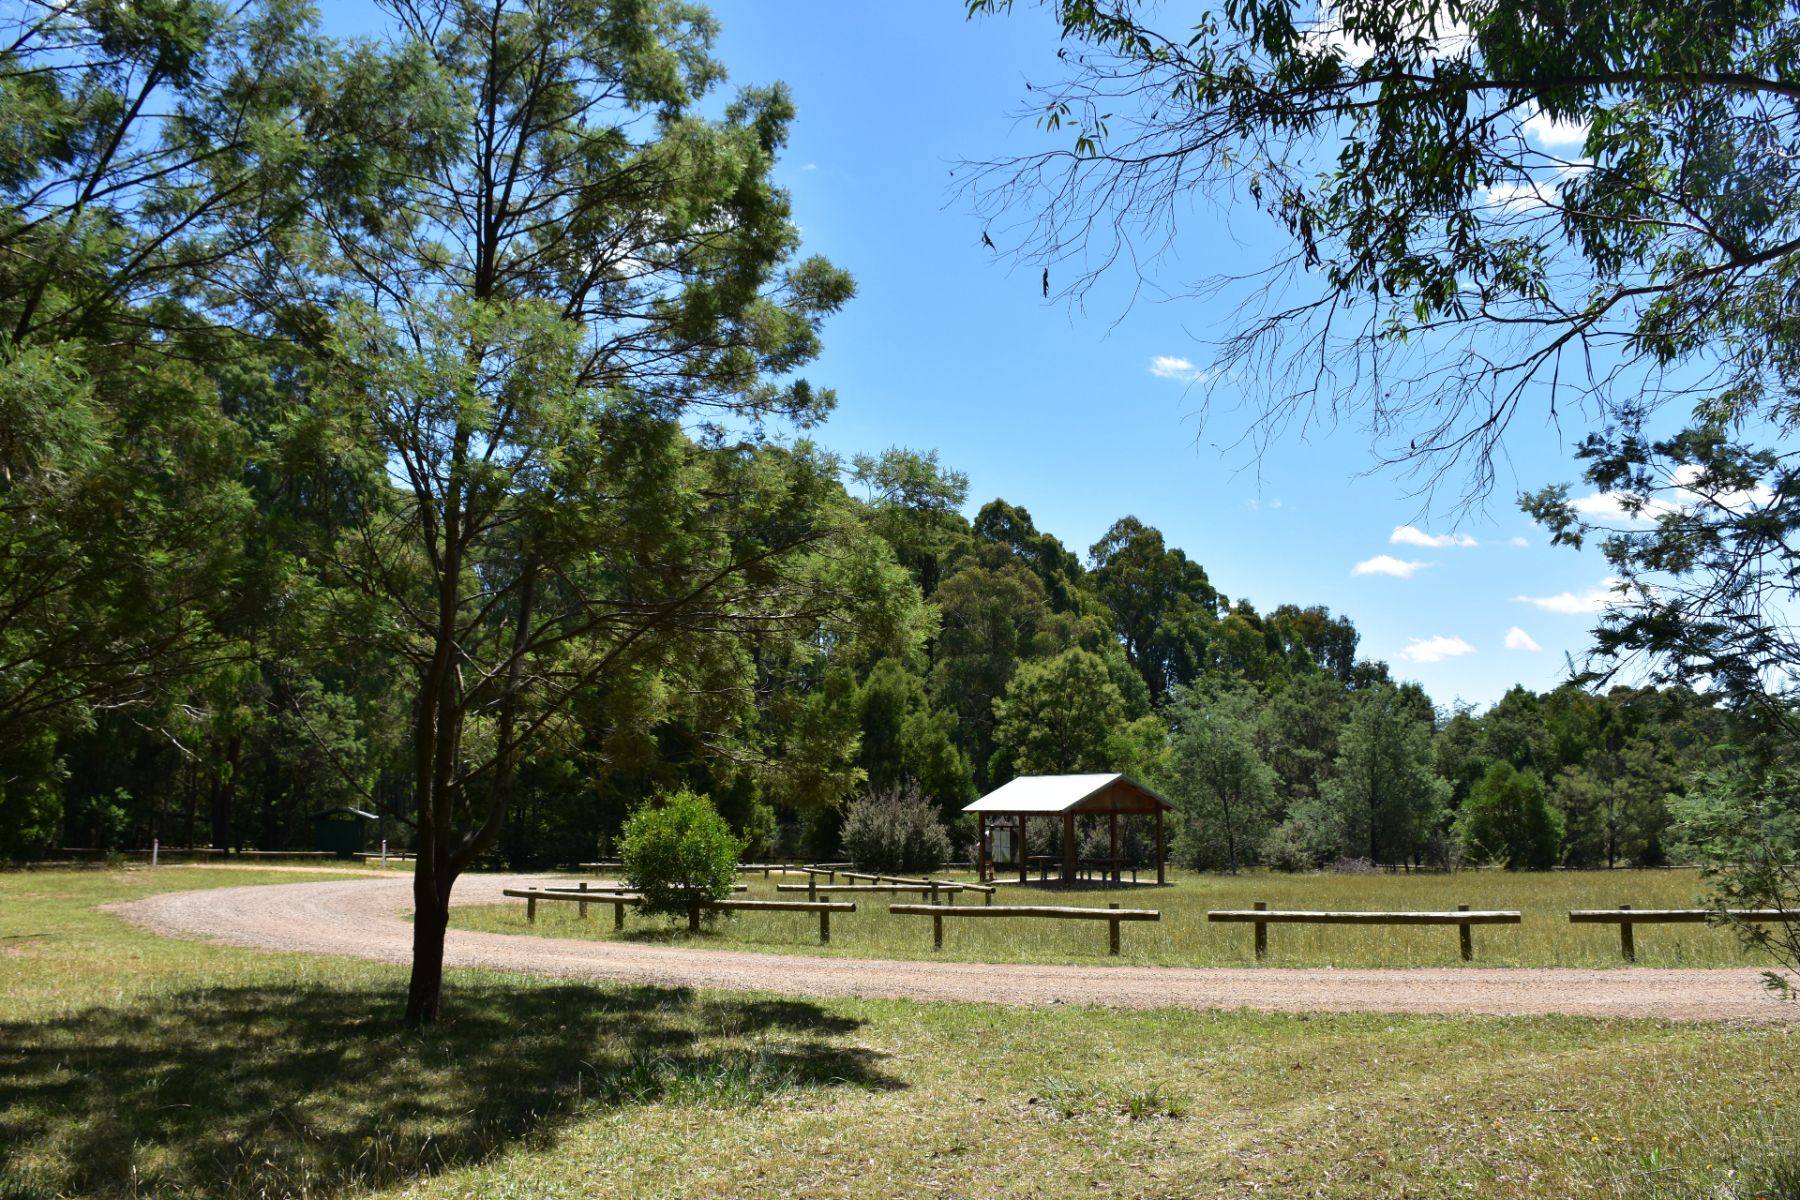 A large and open grassy campground